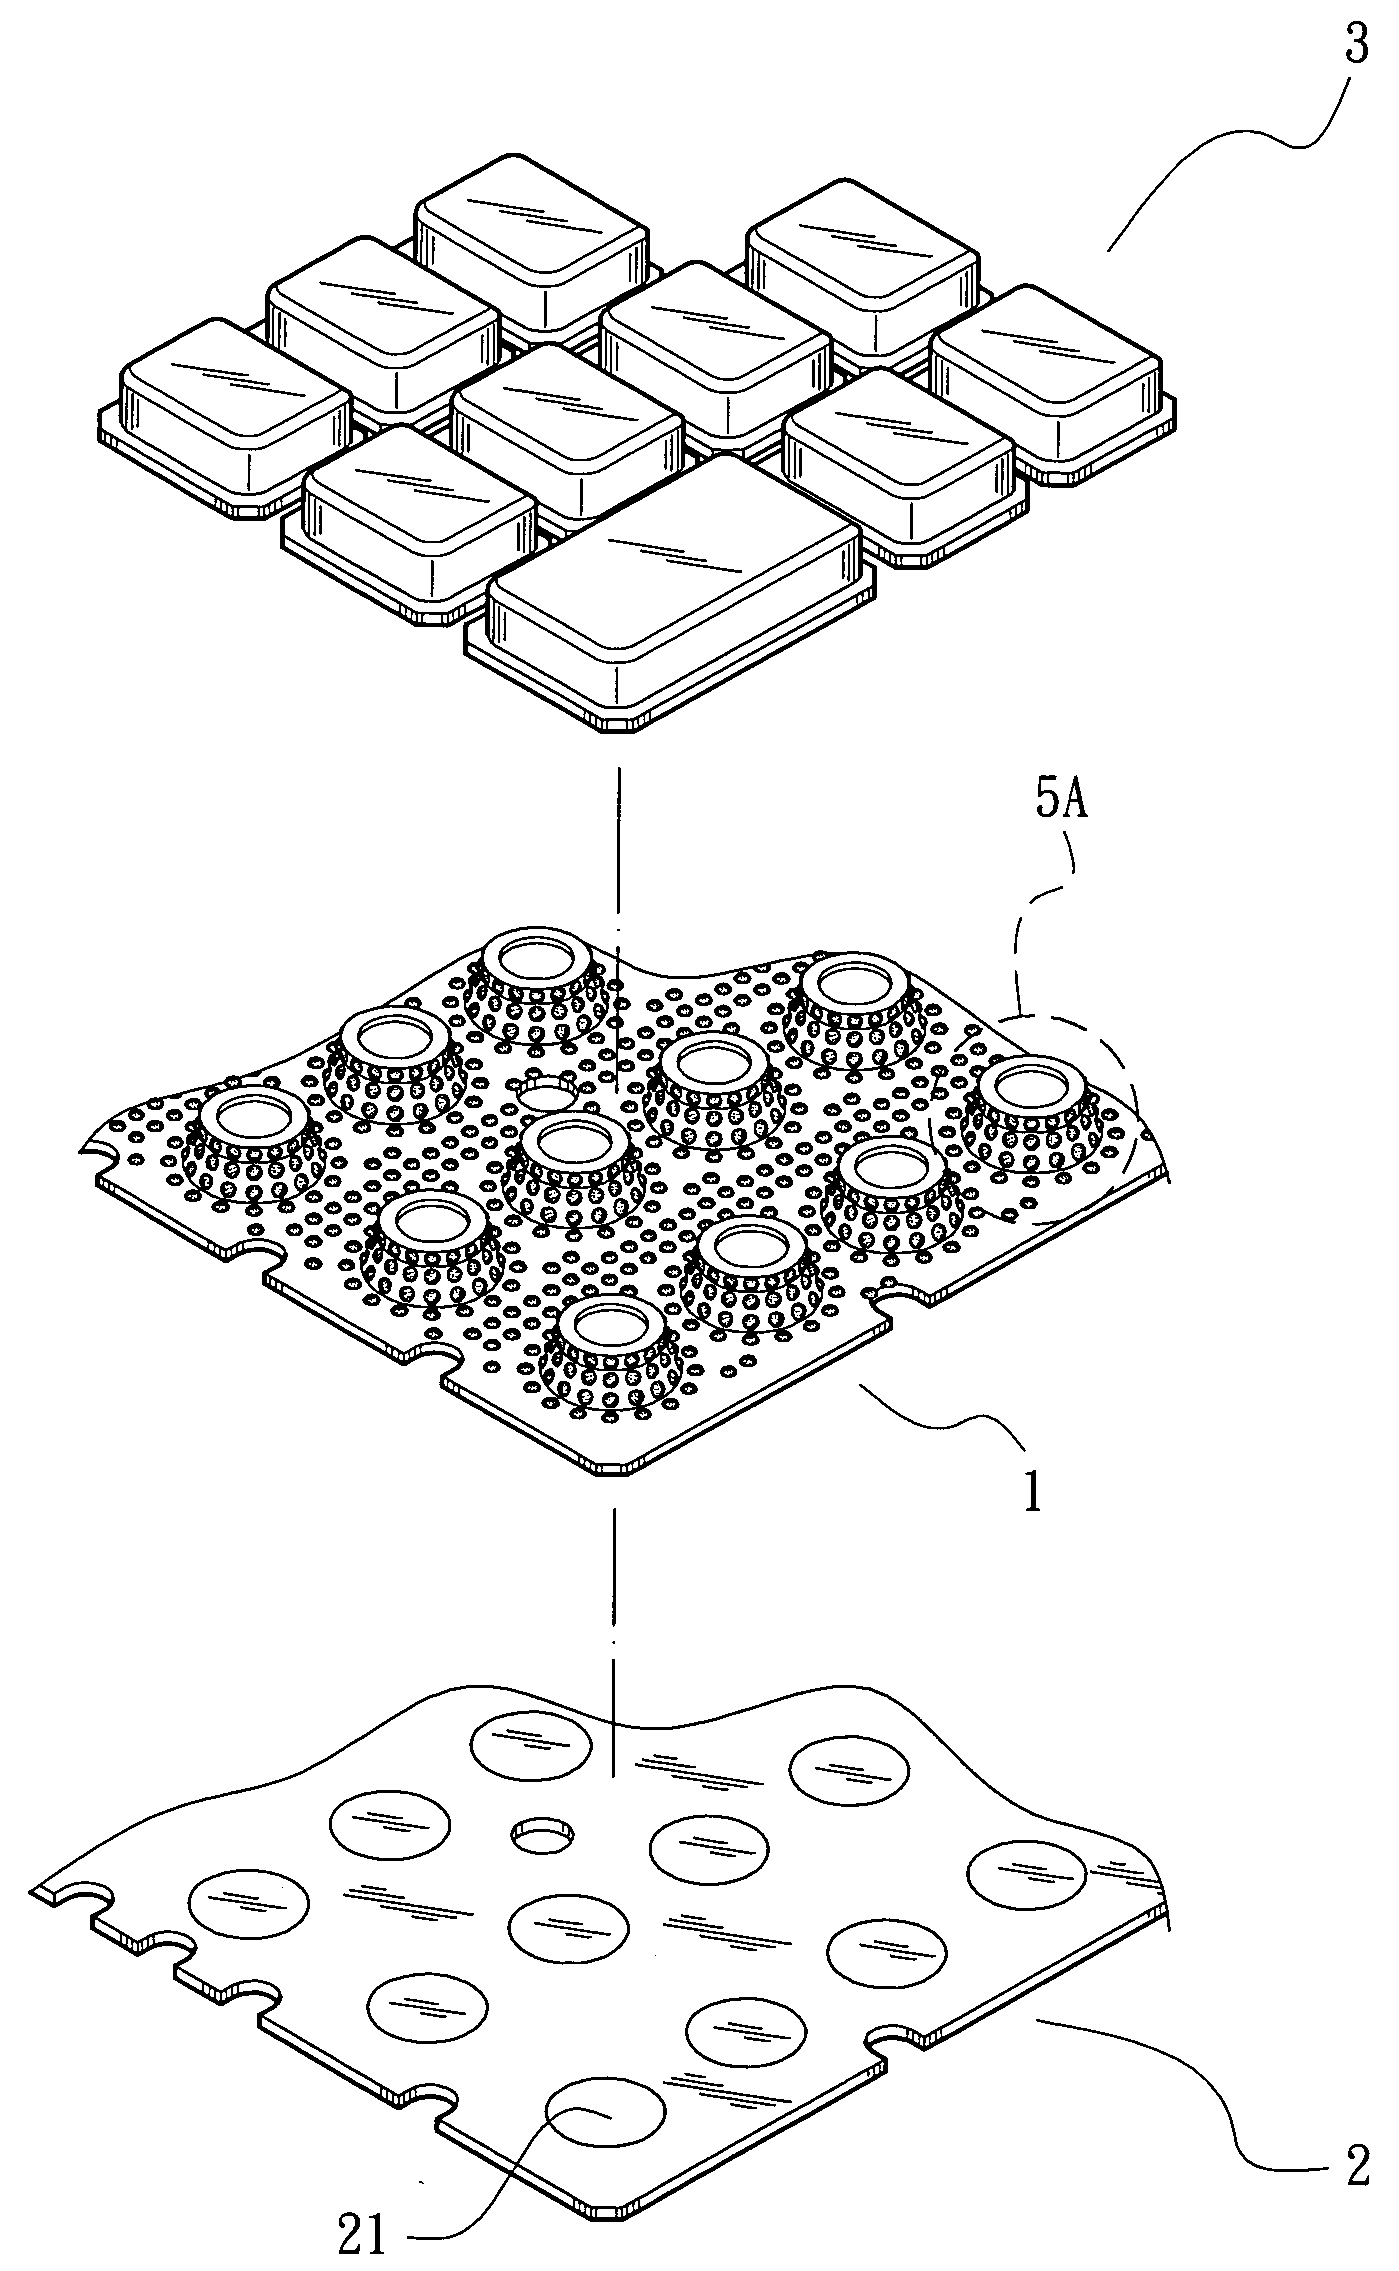 Light guide structure for a keyboard